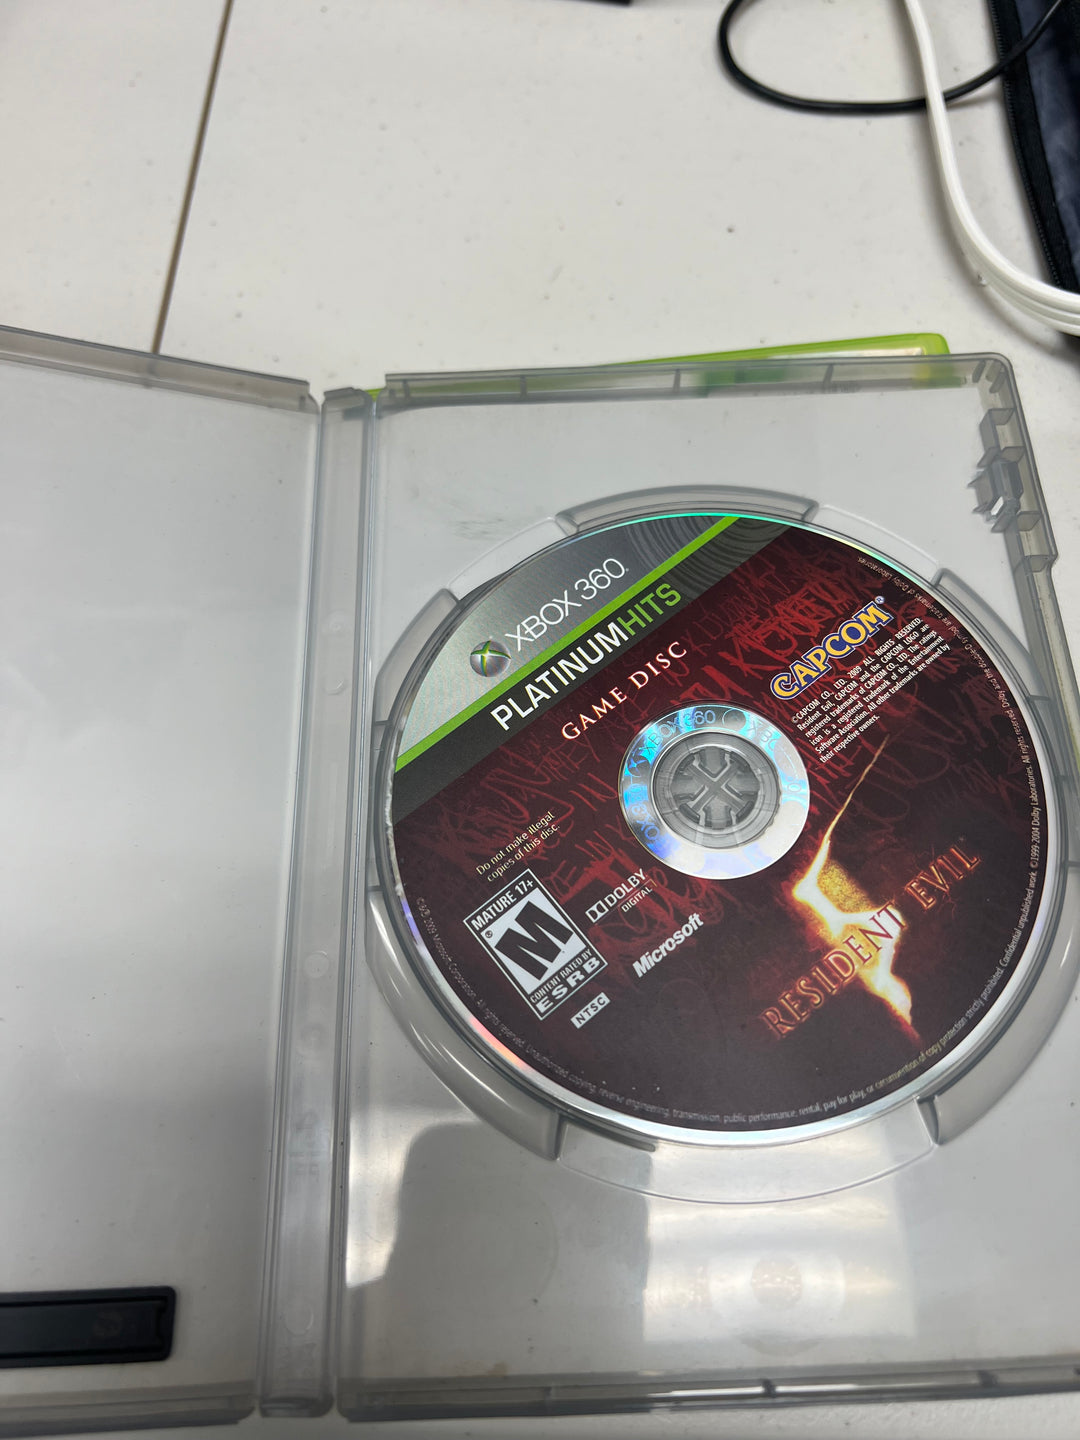 Resident Evil 5 for Microsoft Xbox 360 in case. Tested and working.     DO61024